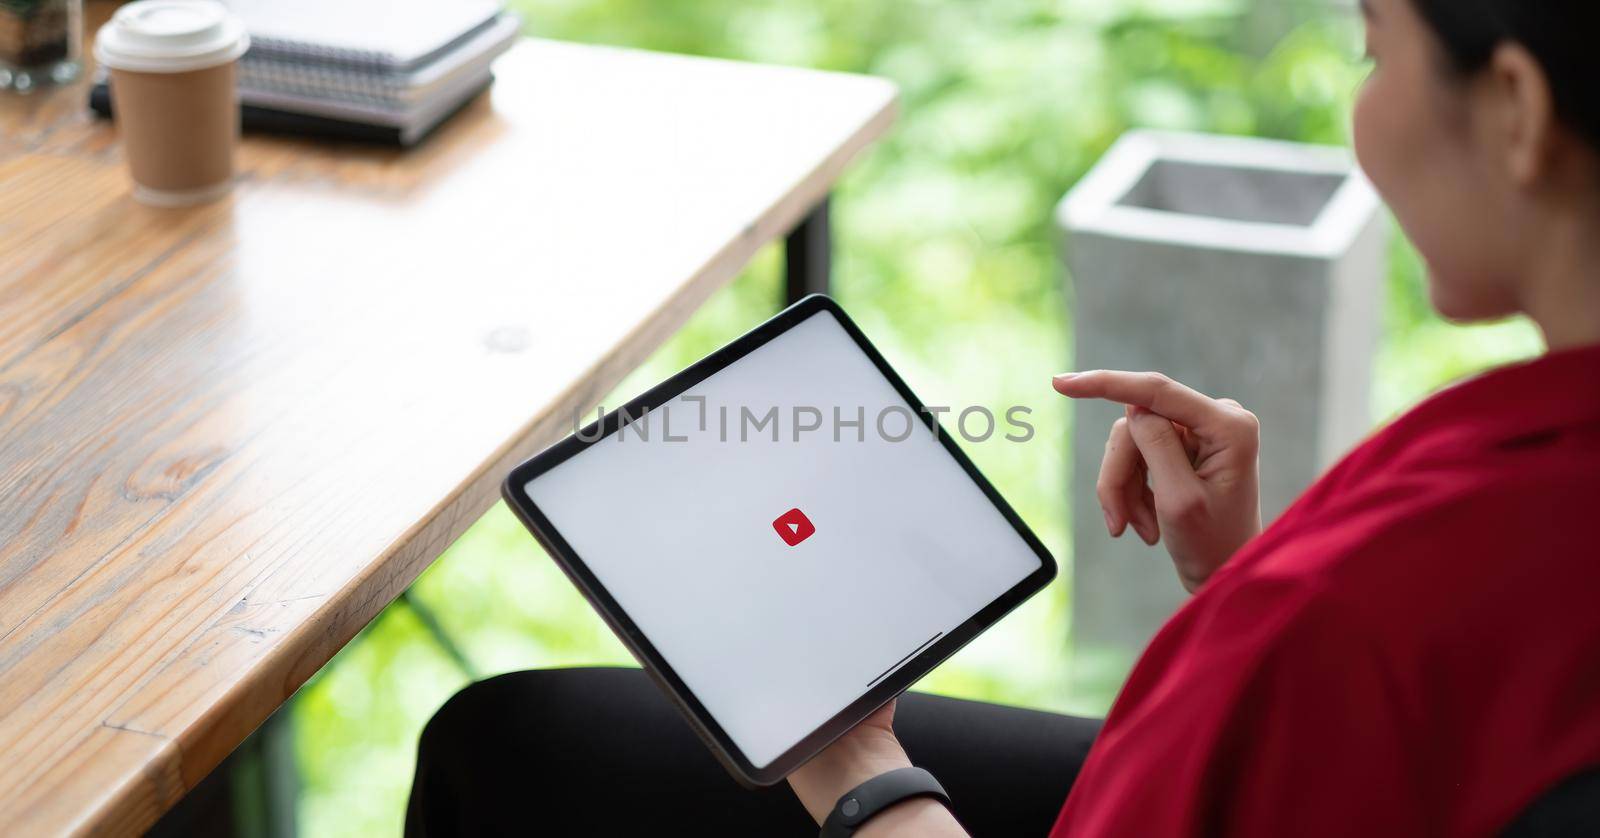 CHIANG MAI, THAILAND - AUG 01, 2021 : Woman hand holding and is pressing the Youtube screen on apple digital tablet, YouTube is the popular online video-sharing website by nateemee